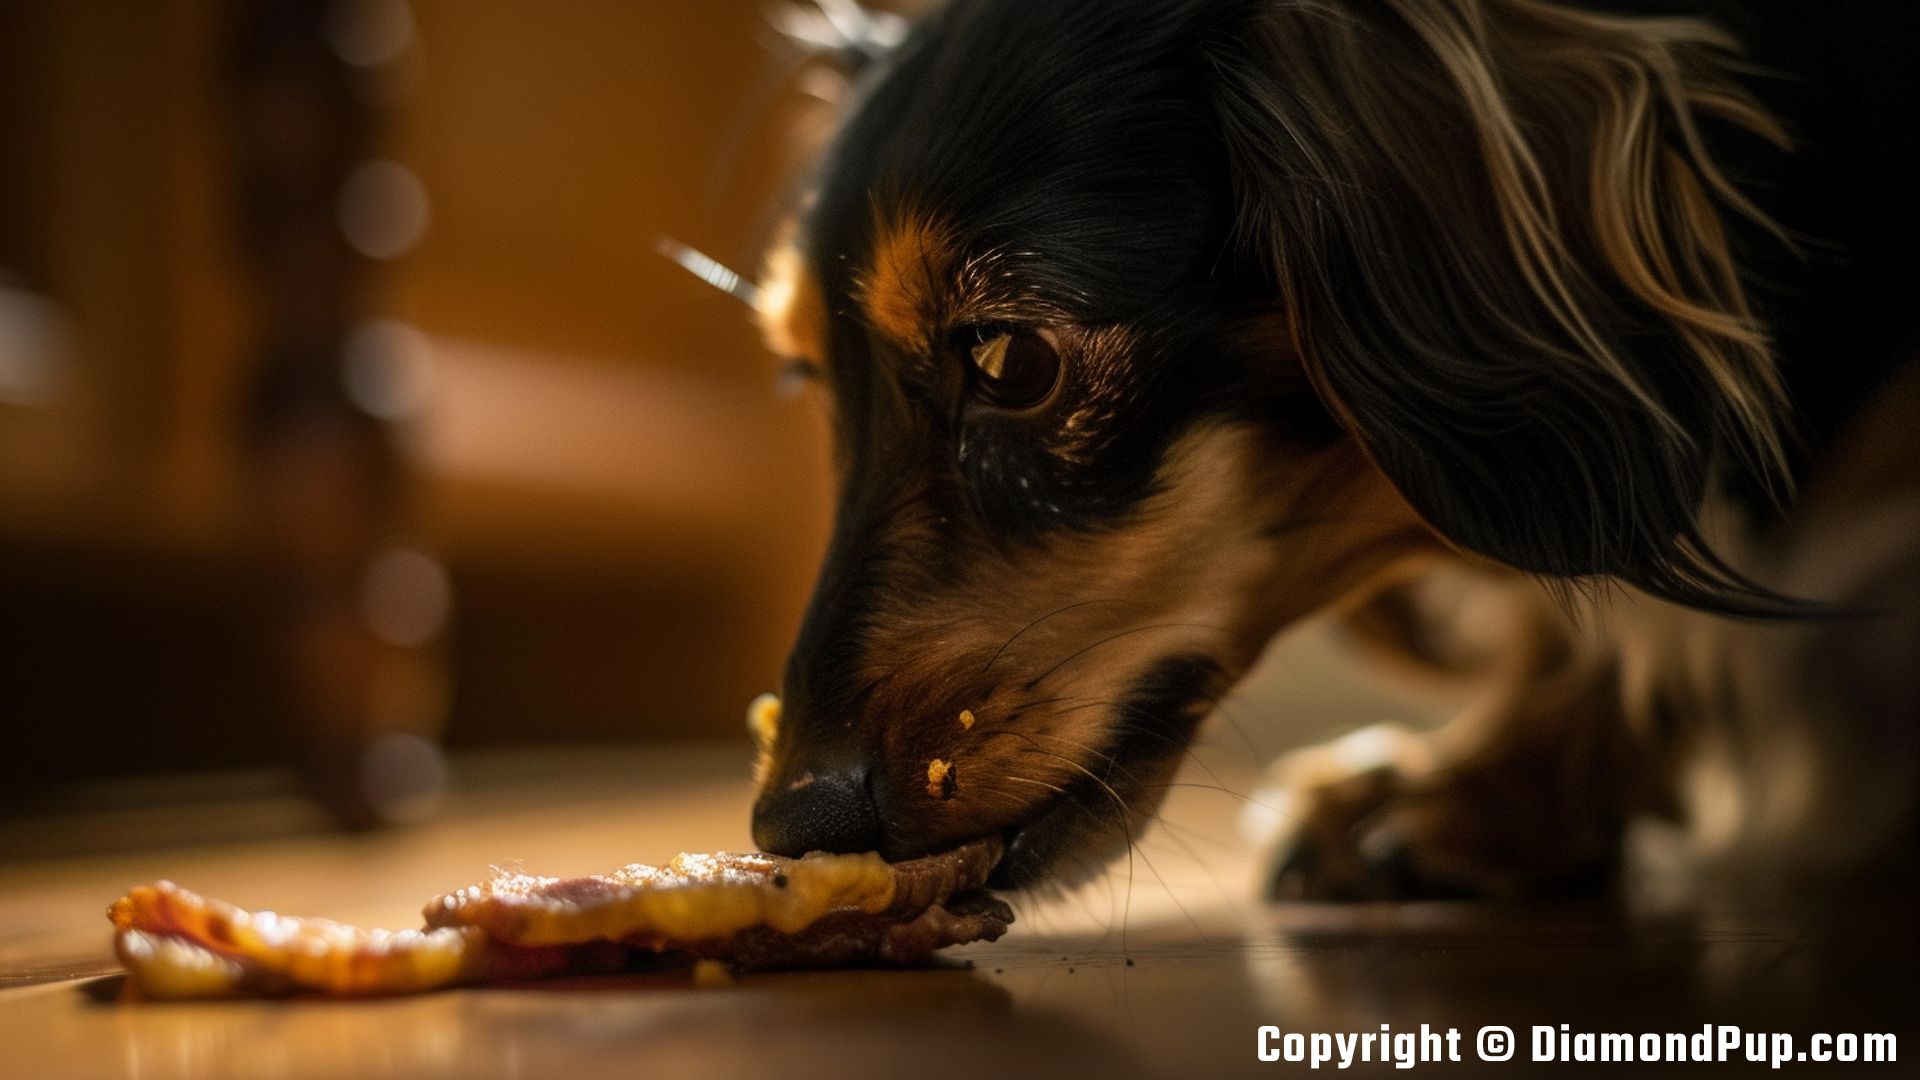 Photograph of Dachshund Snacking on Bacon